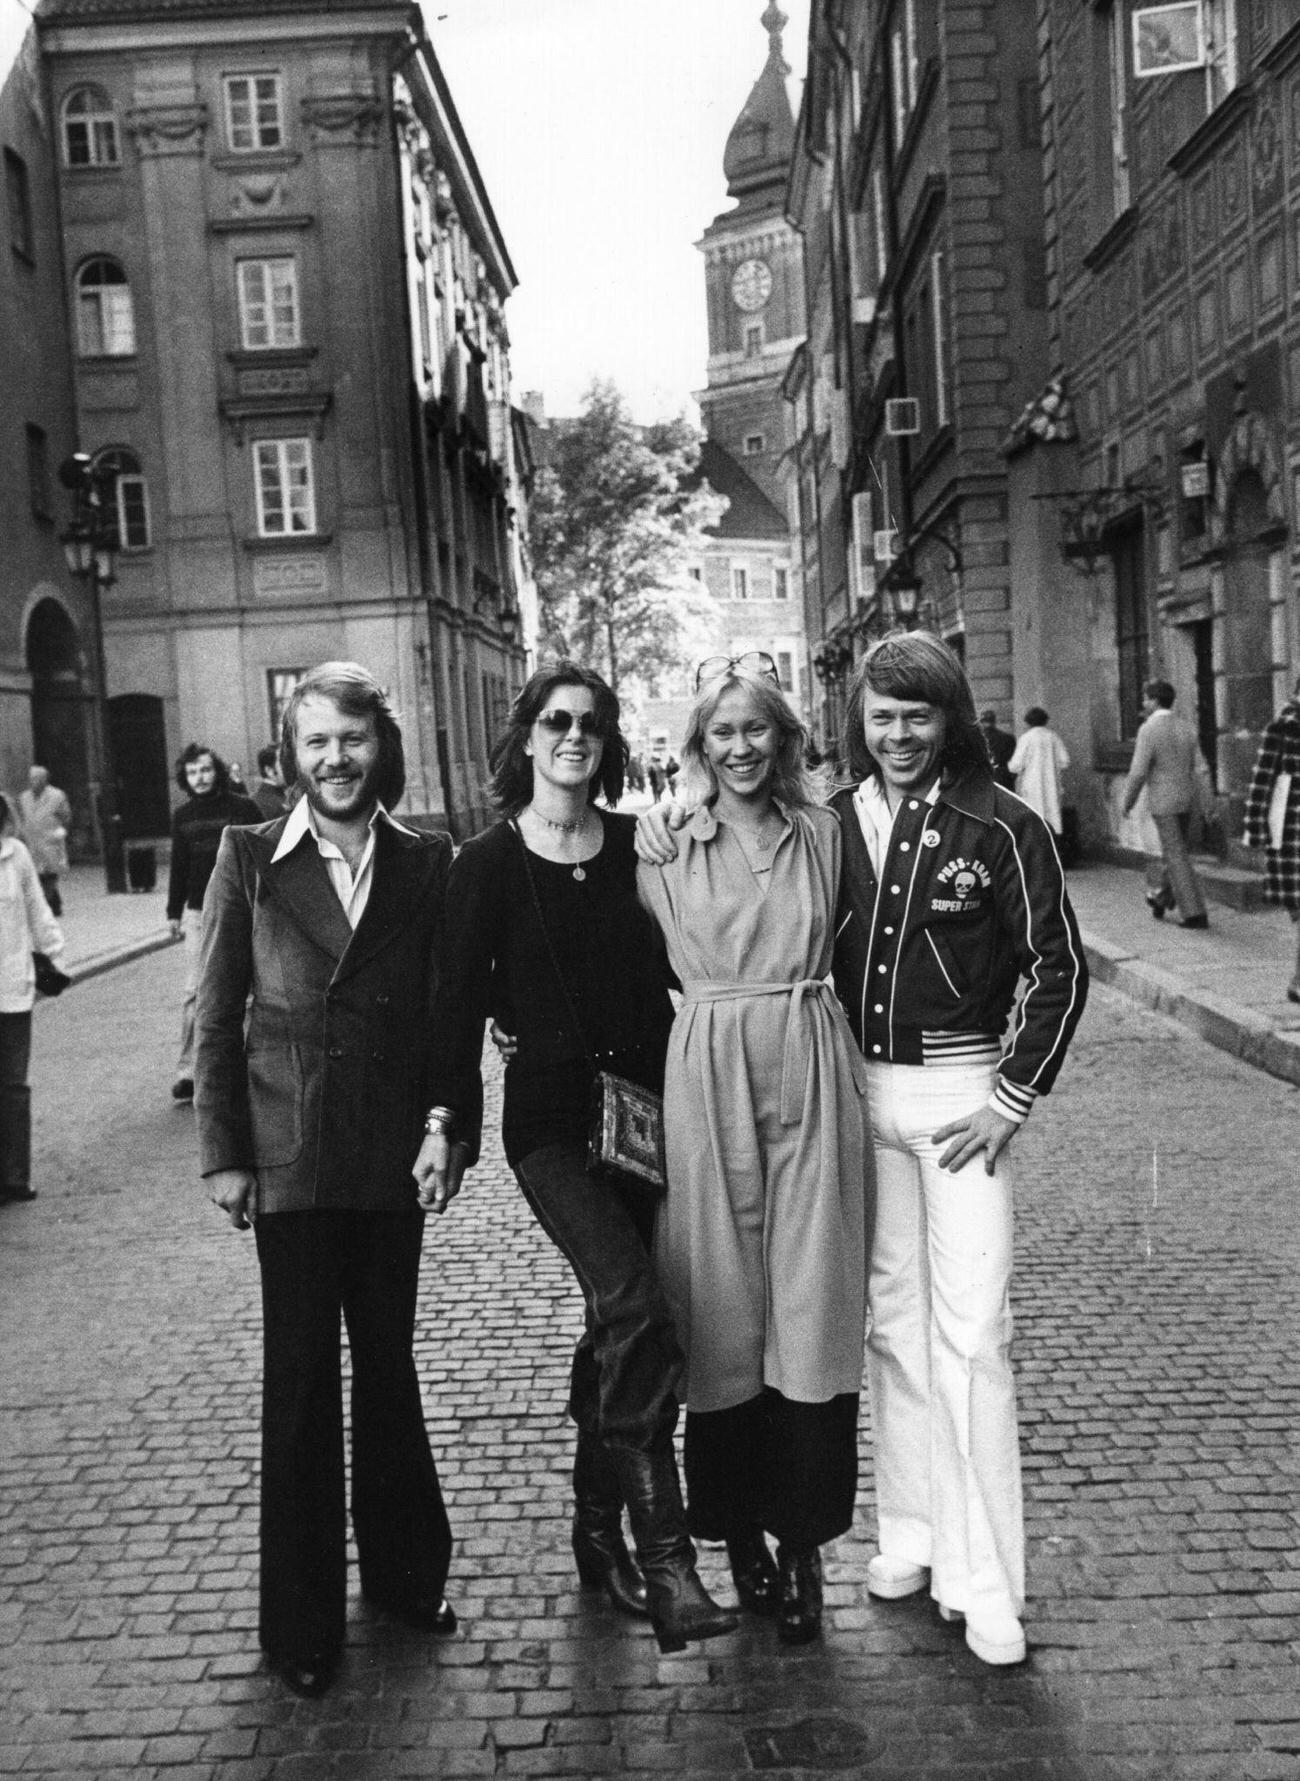 Benny, Annafrid, Agnetha and Benny in a cobbled street, 1975